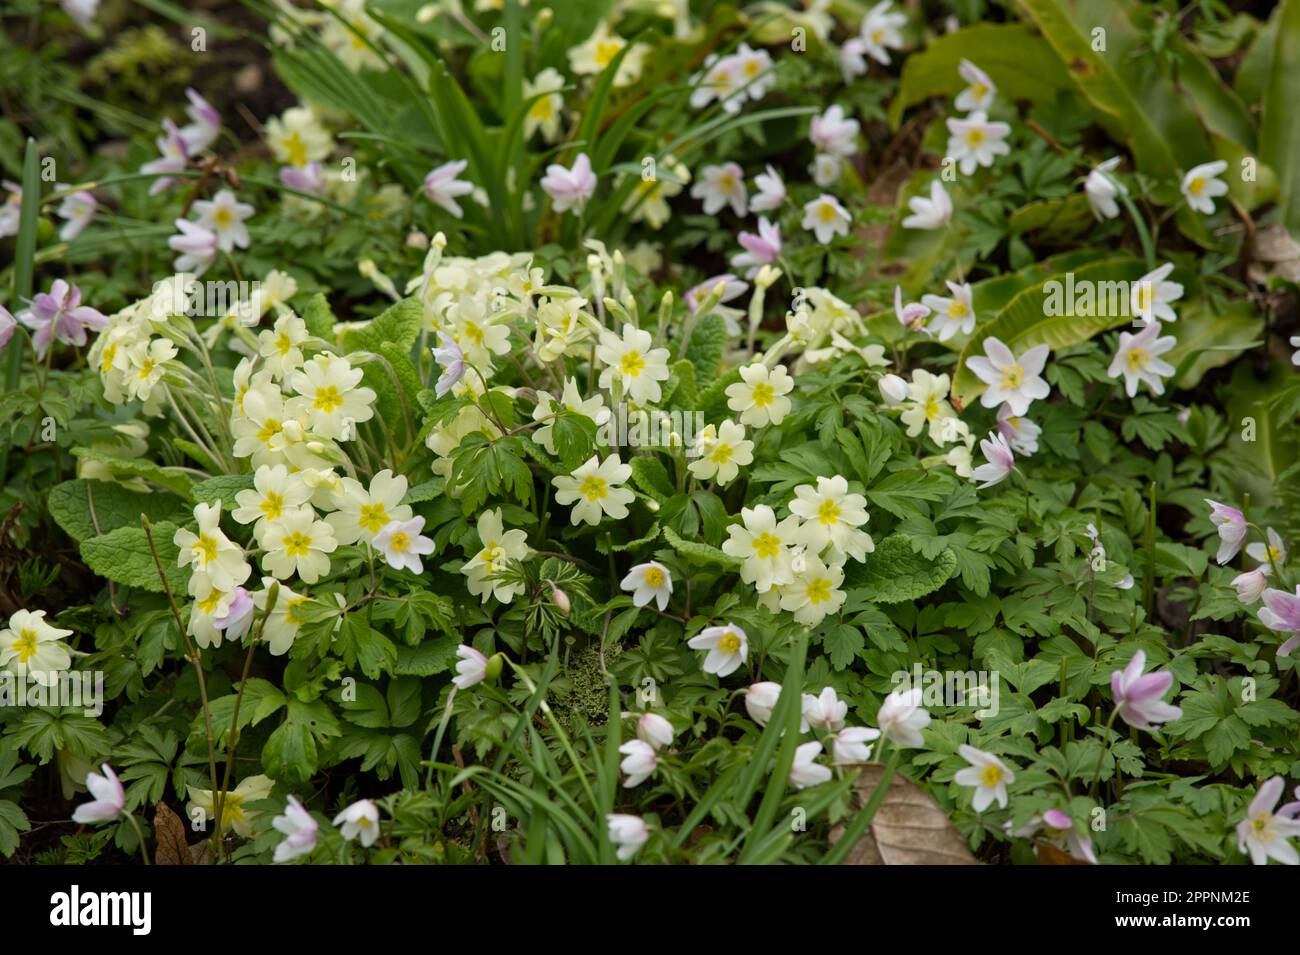 Pale yellow primroses Primula vulgaris and pink spring flowers of wood anemone nemorosa E.A. Bowles in UK garden April Stock Photo